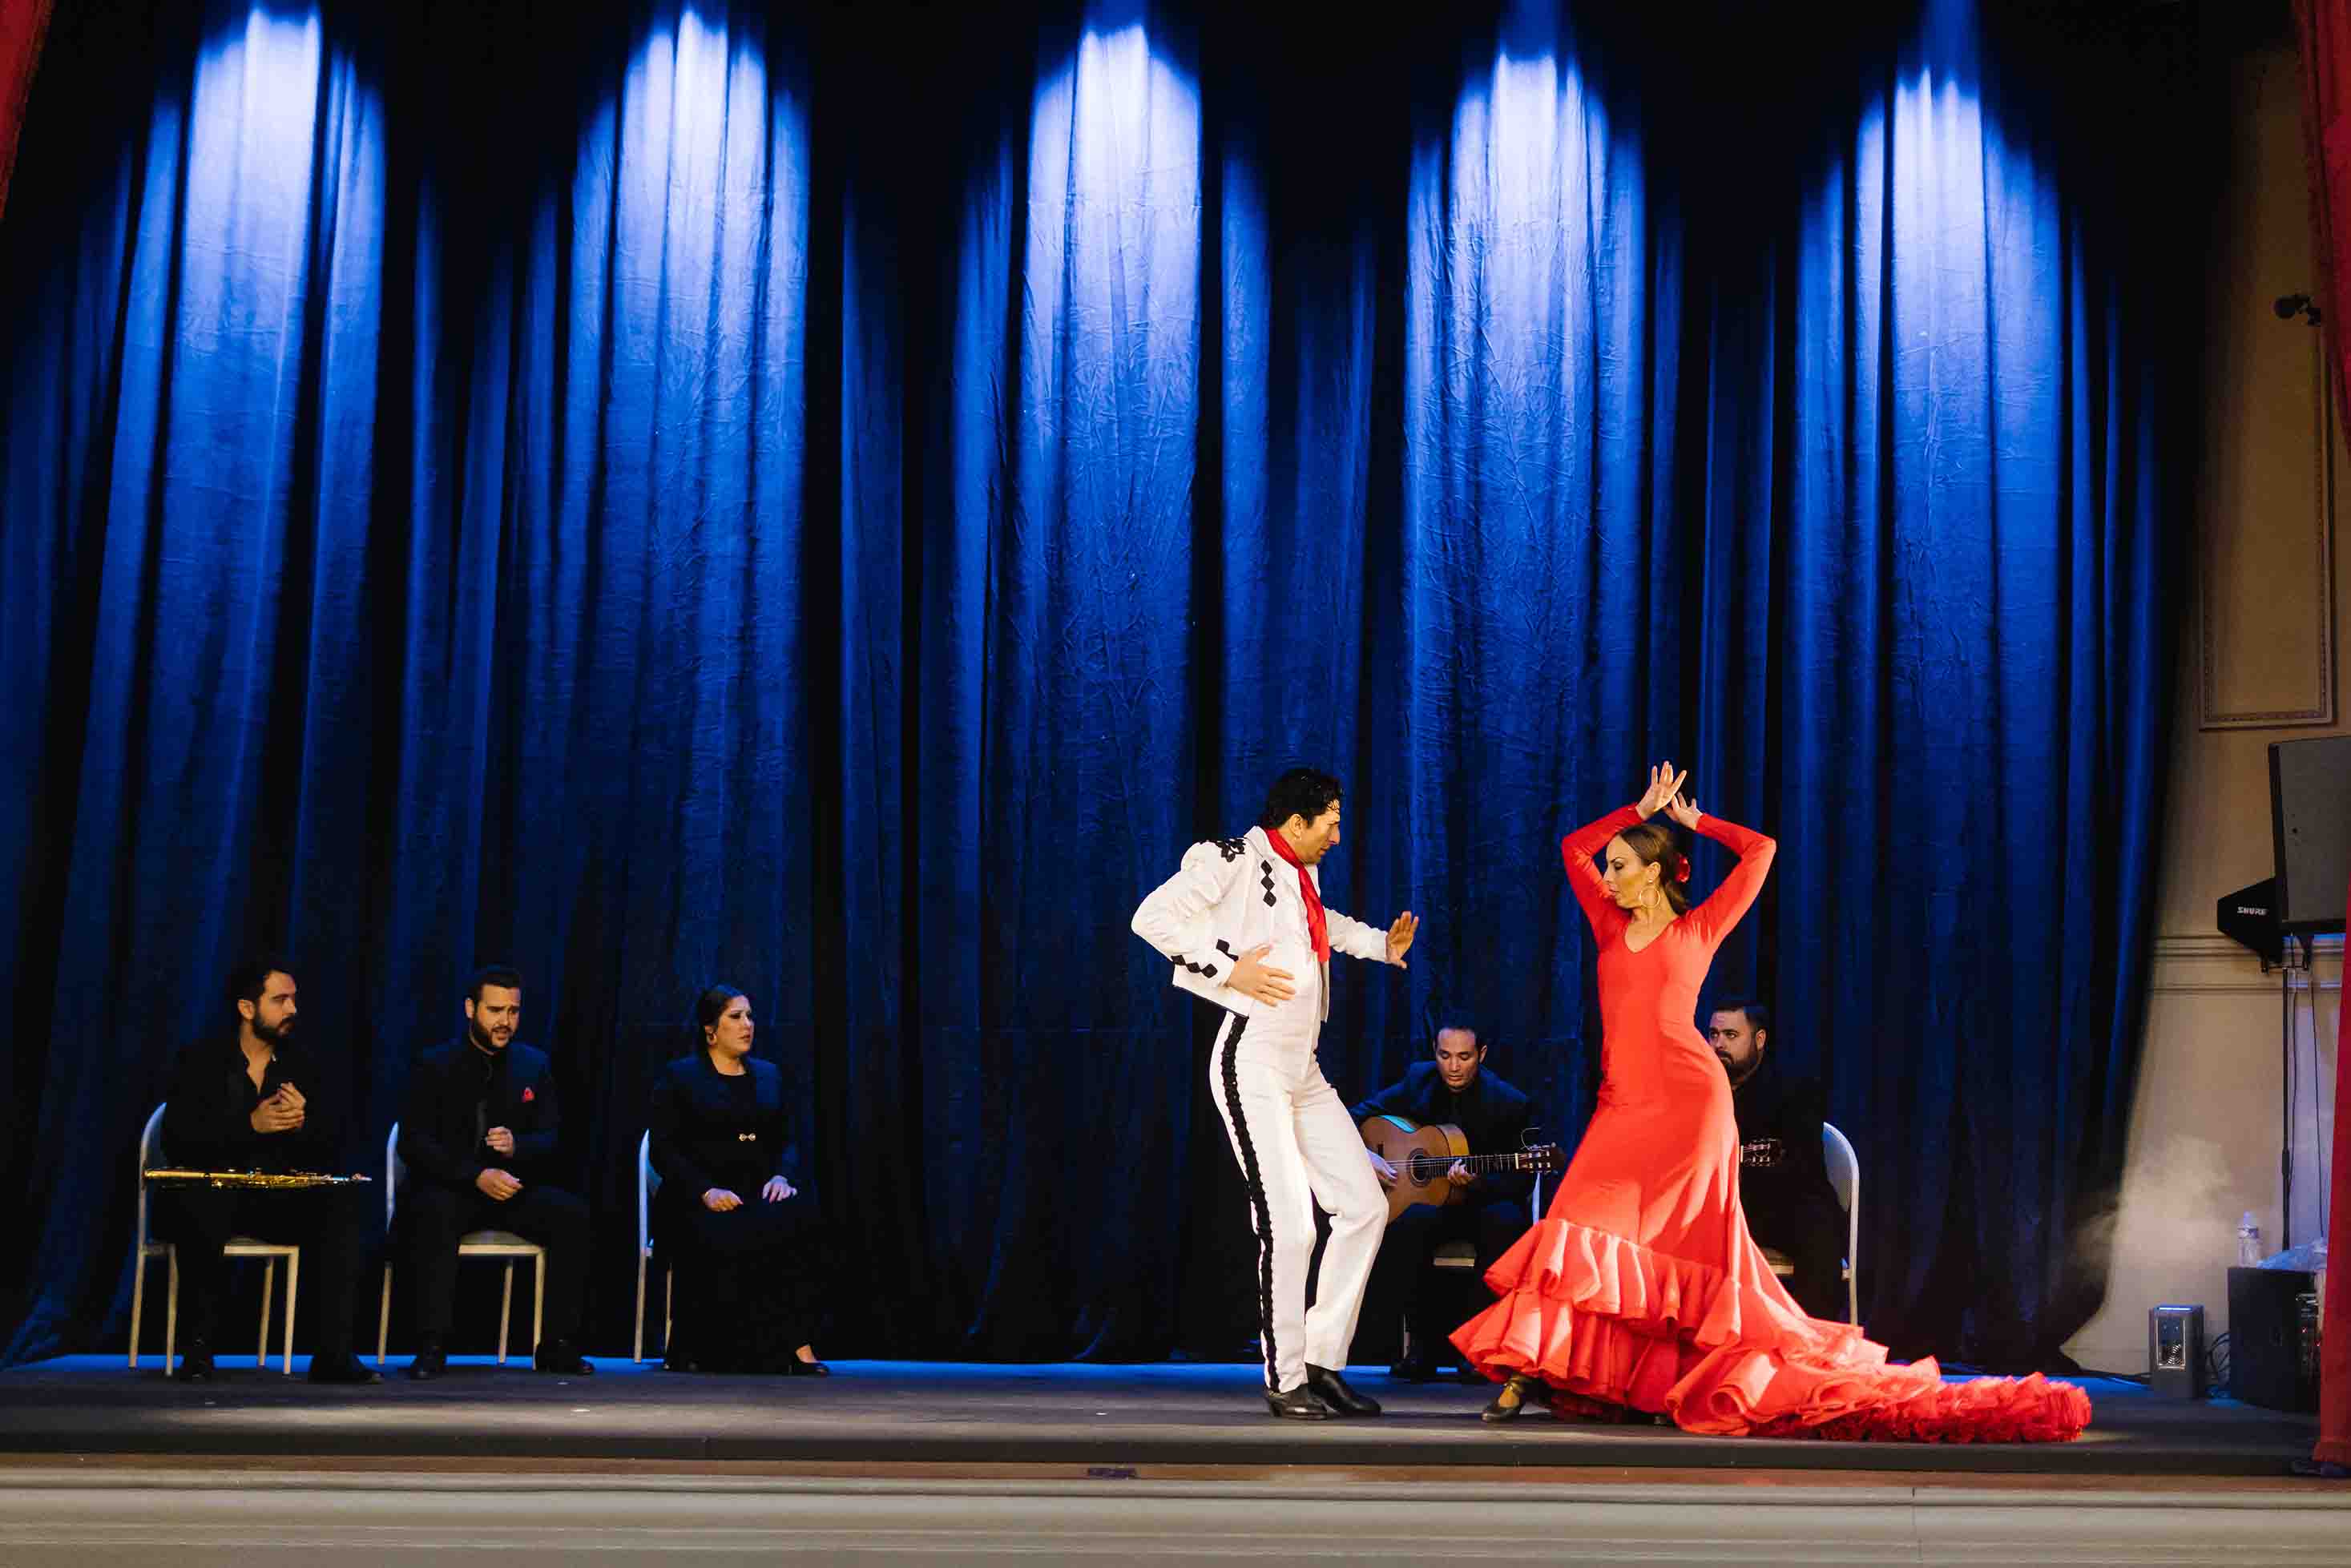 A man from the Royal Opera of Madrid dancing flamenco - Authentic Flamenco in London: A Traditional Spanish Show